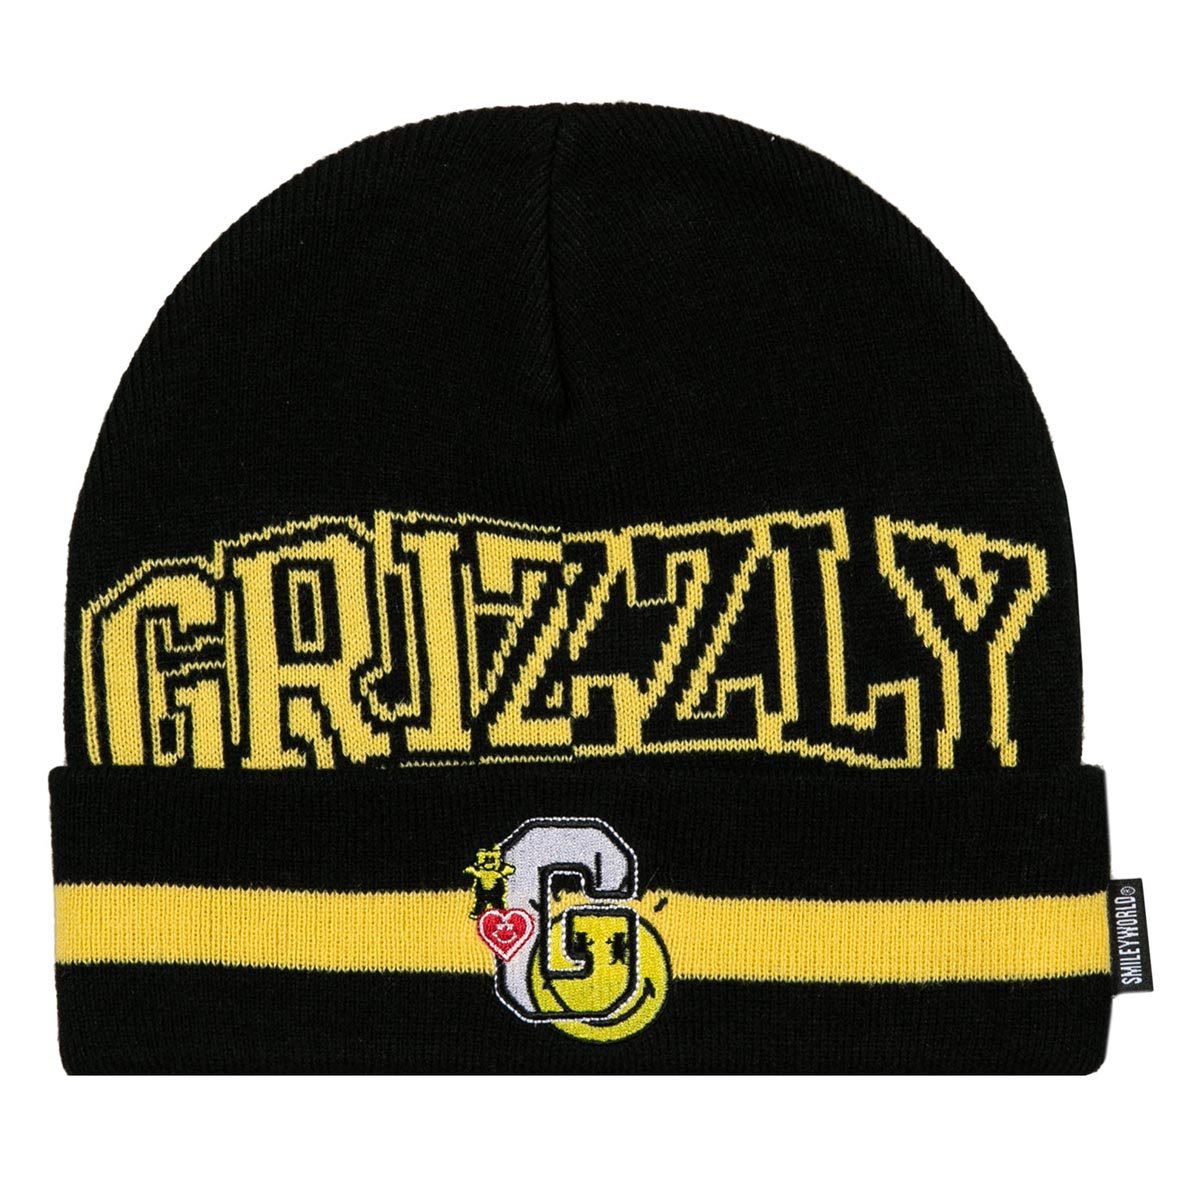 Grizzly x Smiley World School Of Happines Beanie - Black image 1